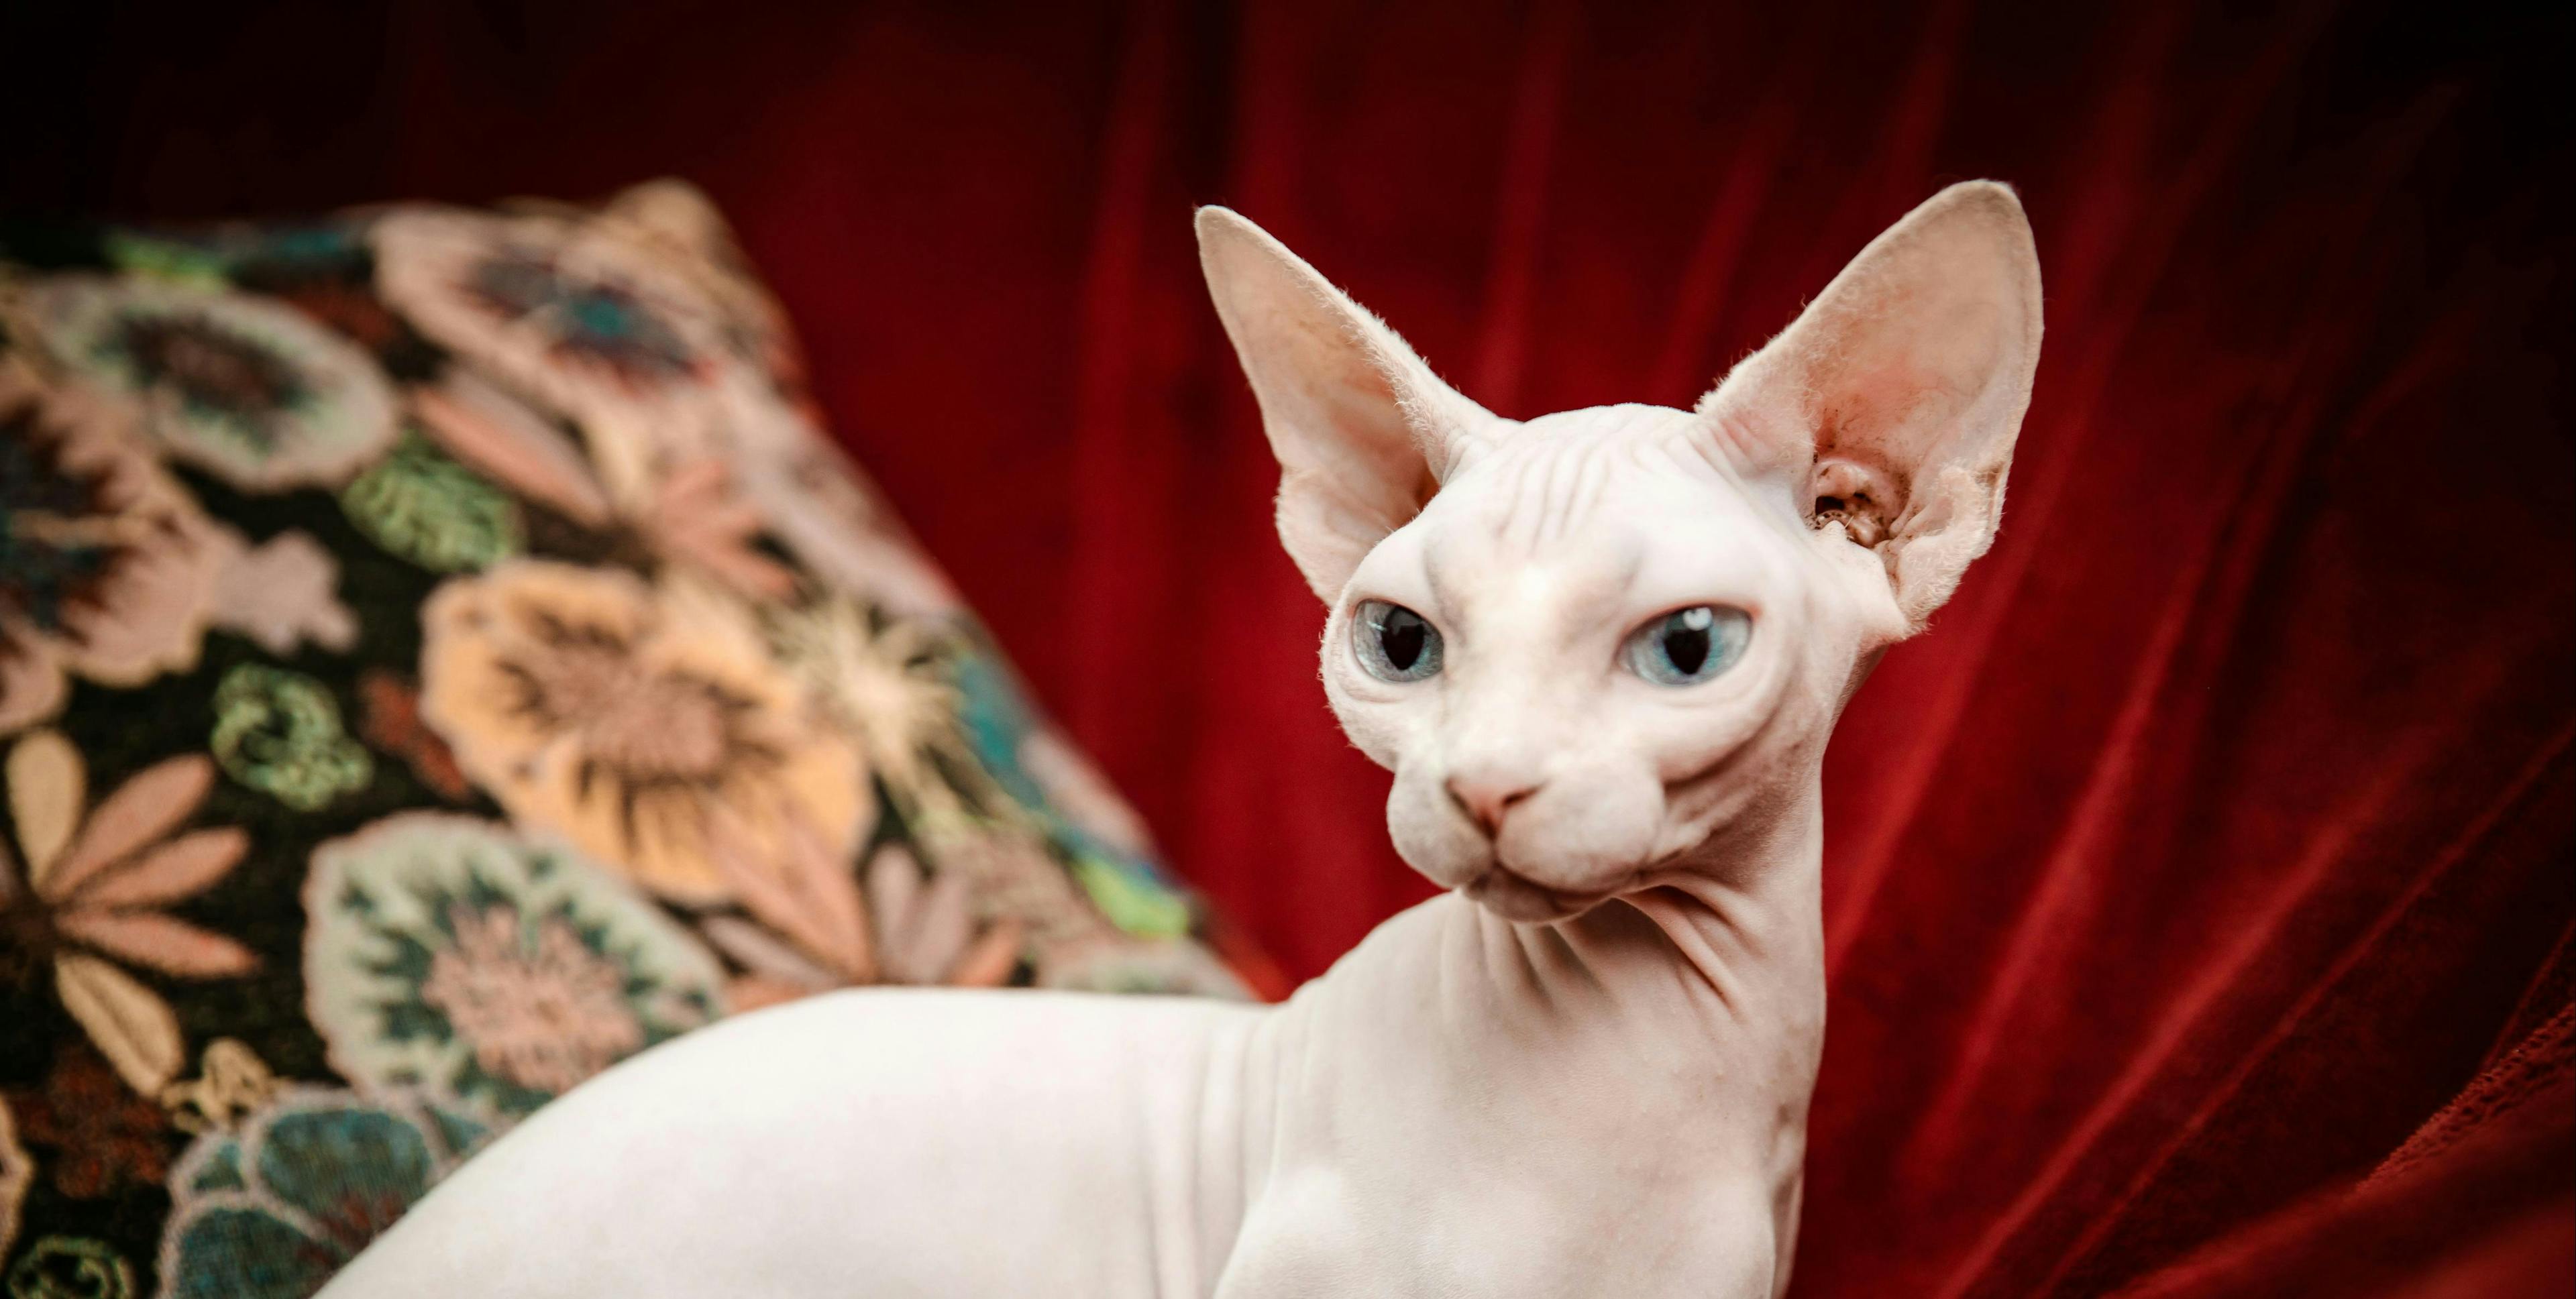 How to Care for a Sphynx Cat